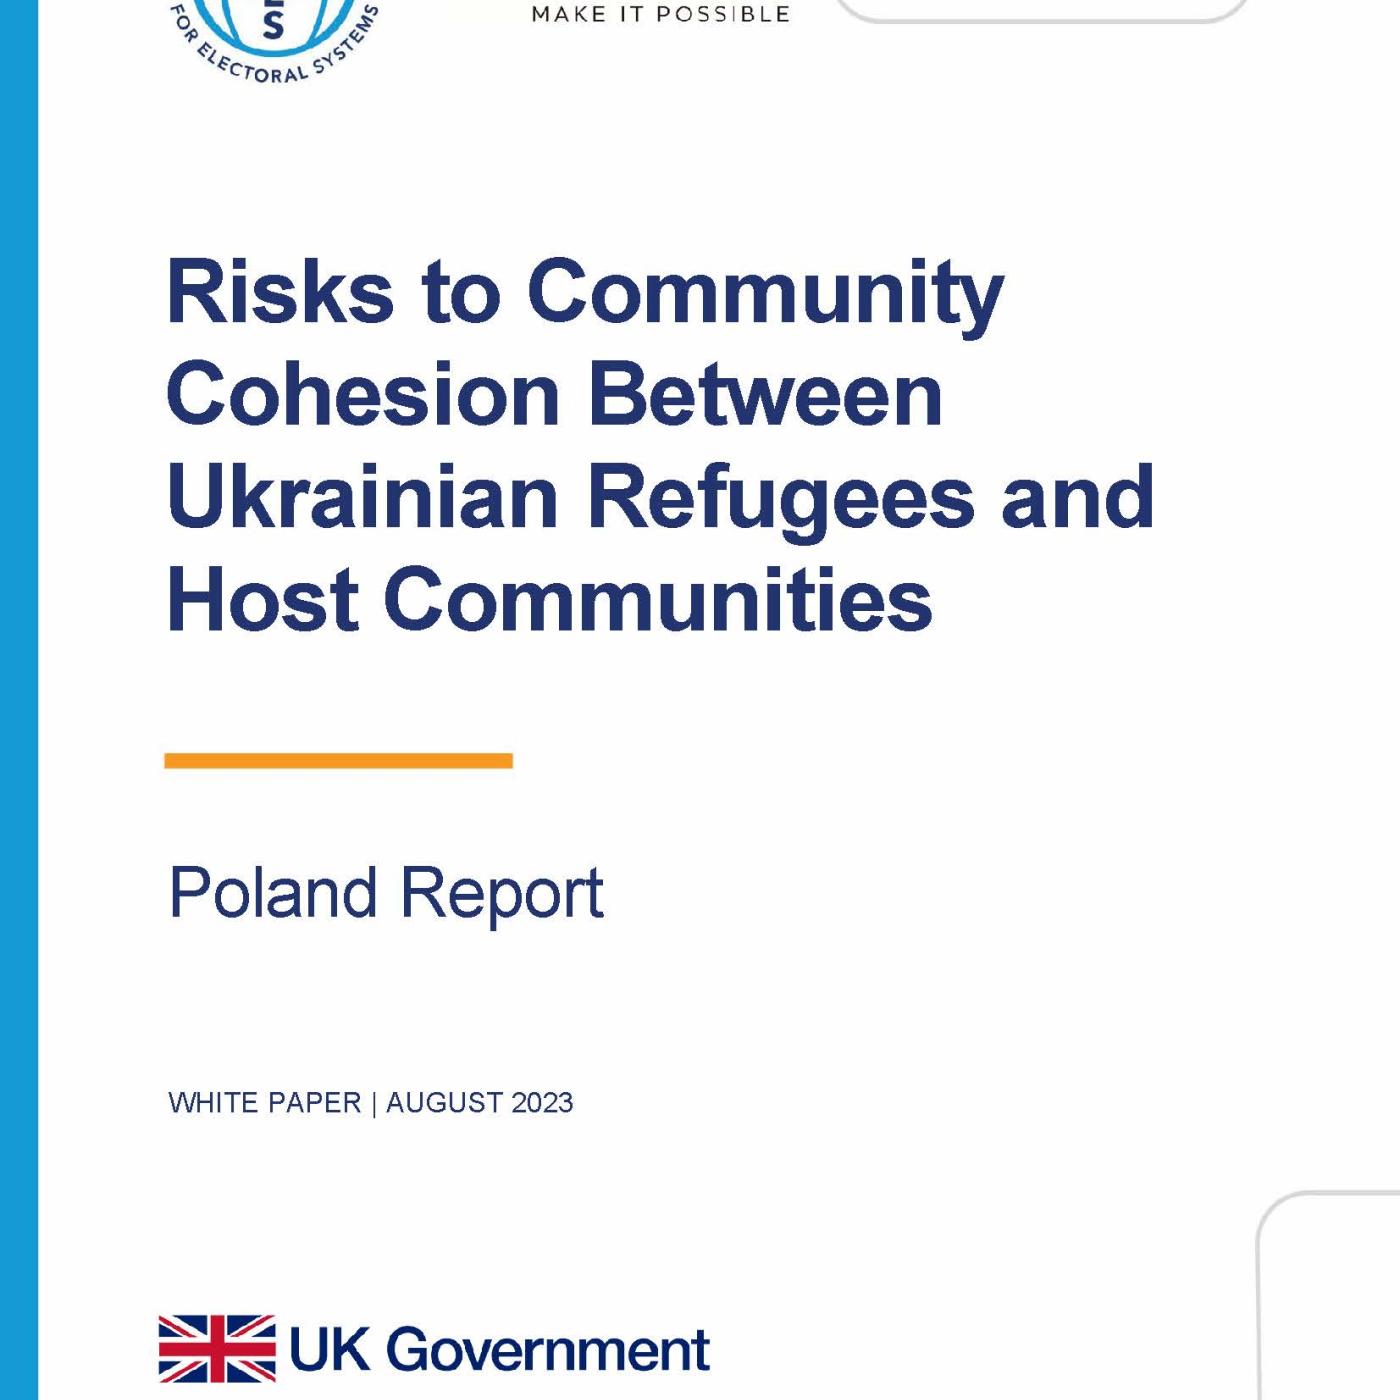 Cover page of the IFES-Palladium report on Community Cohesion between Ukraine refugees in Poland.